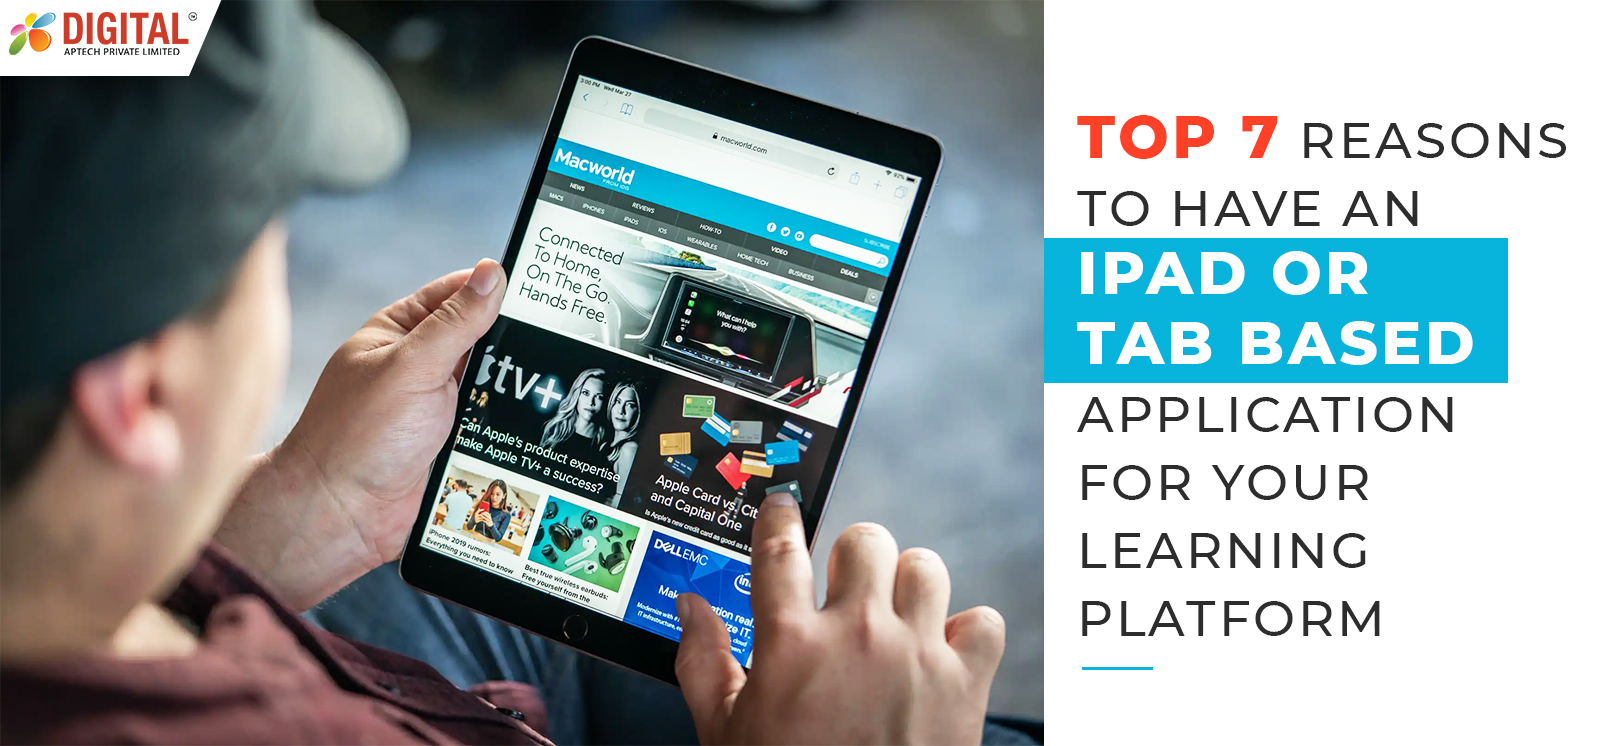 Top 7 Reasons to Have an iPad or Tab based Application for your Learning Platform